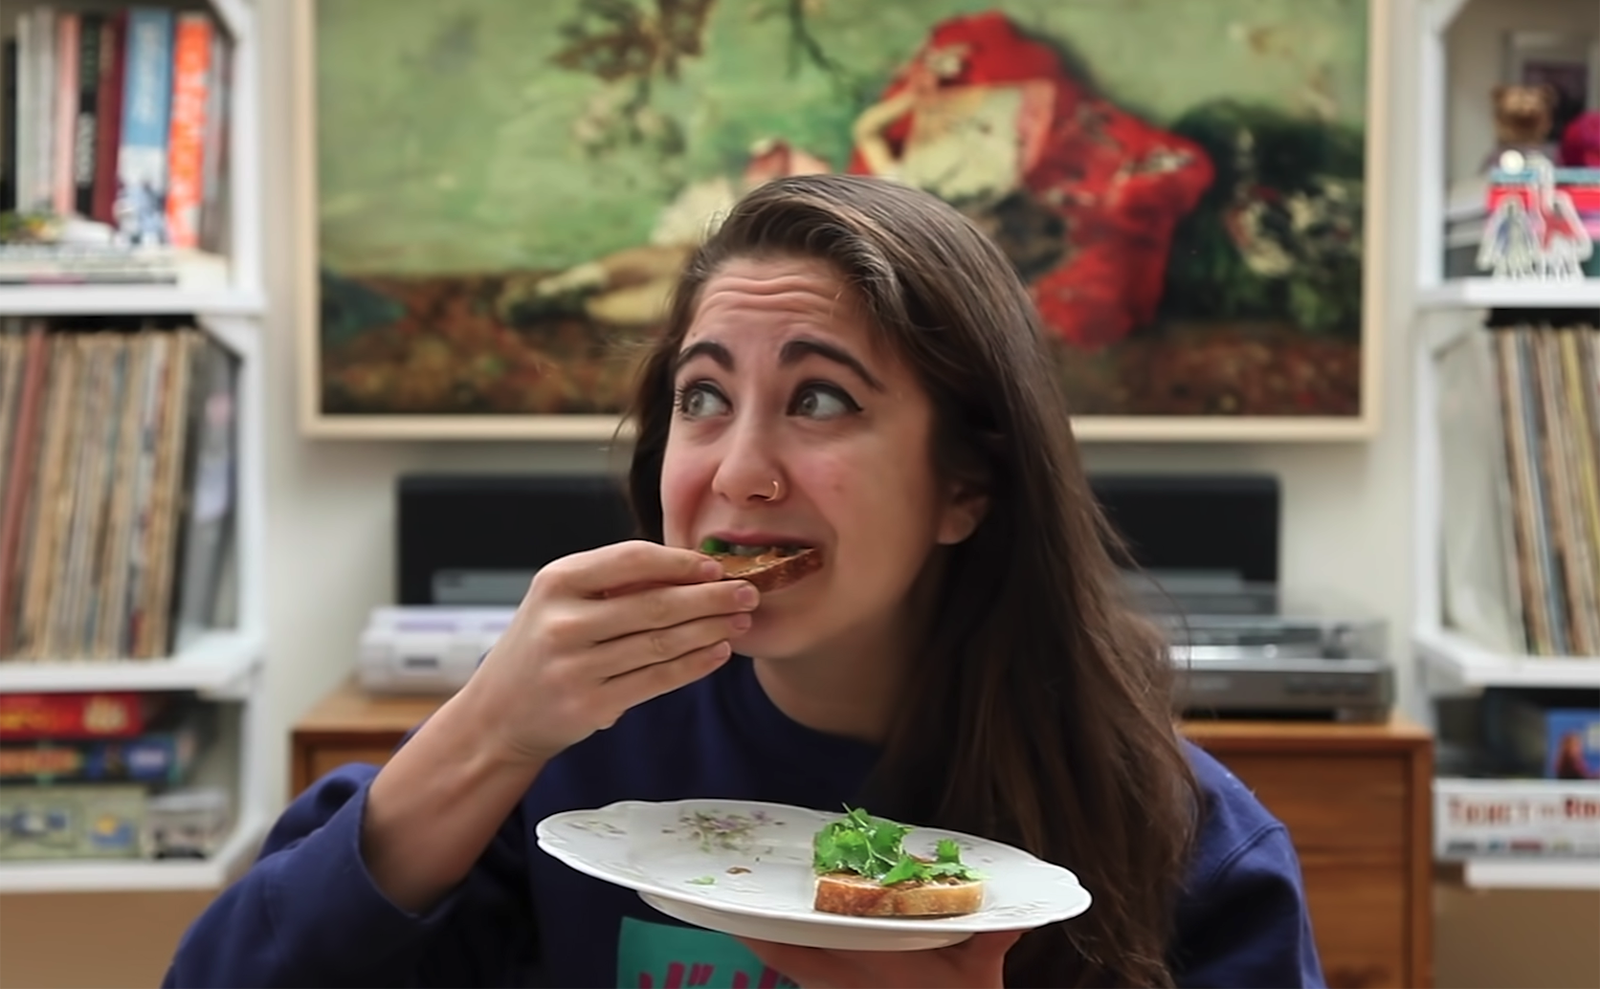 brunette girl taking a bite of toast while holding a plate